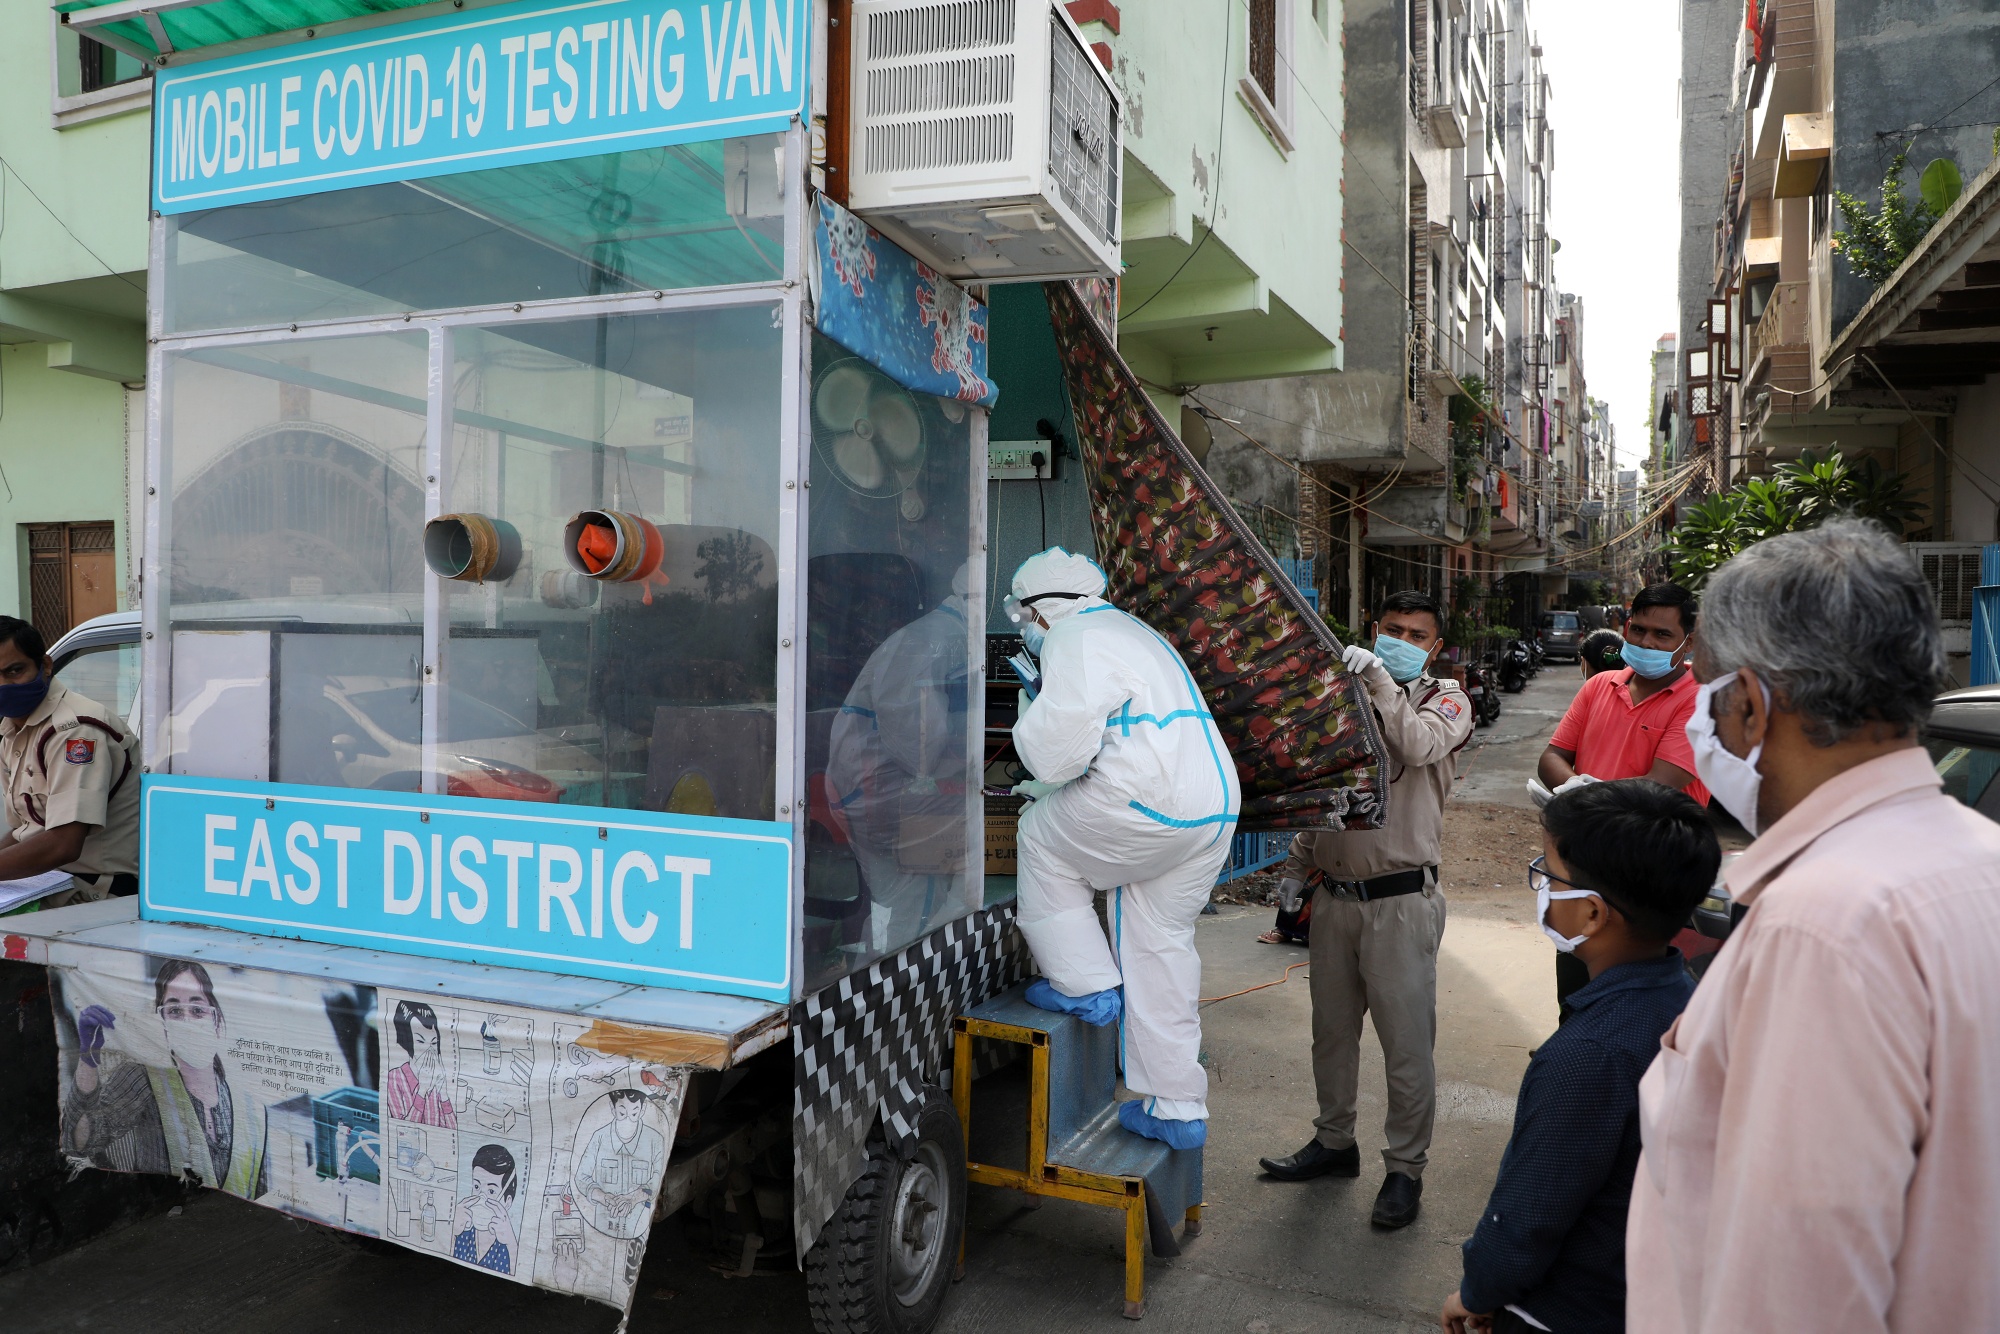 A health worker arrives at a mobile Covid-19 testing van in New Delhi, Aug. 16.